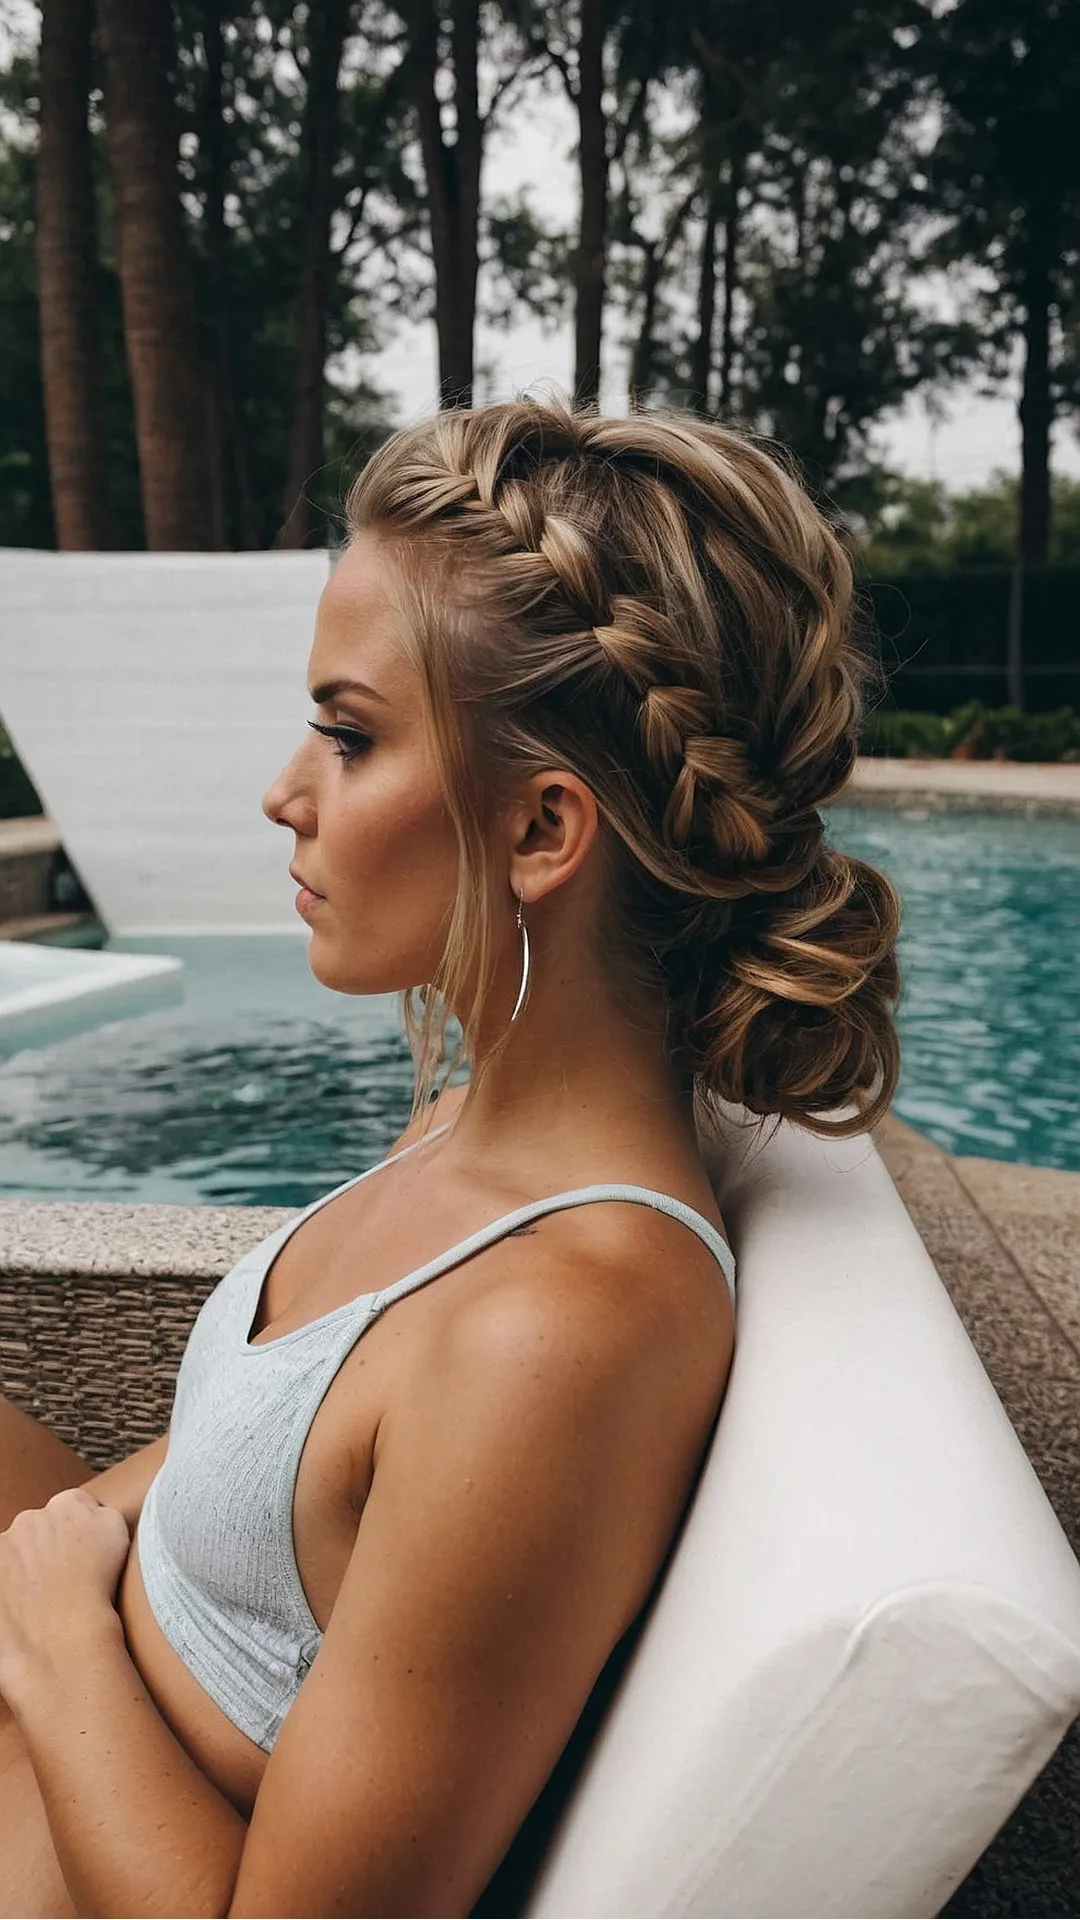 Tresses by the Pool